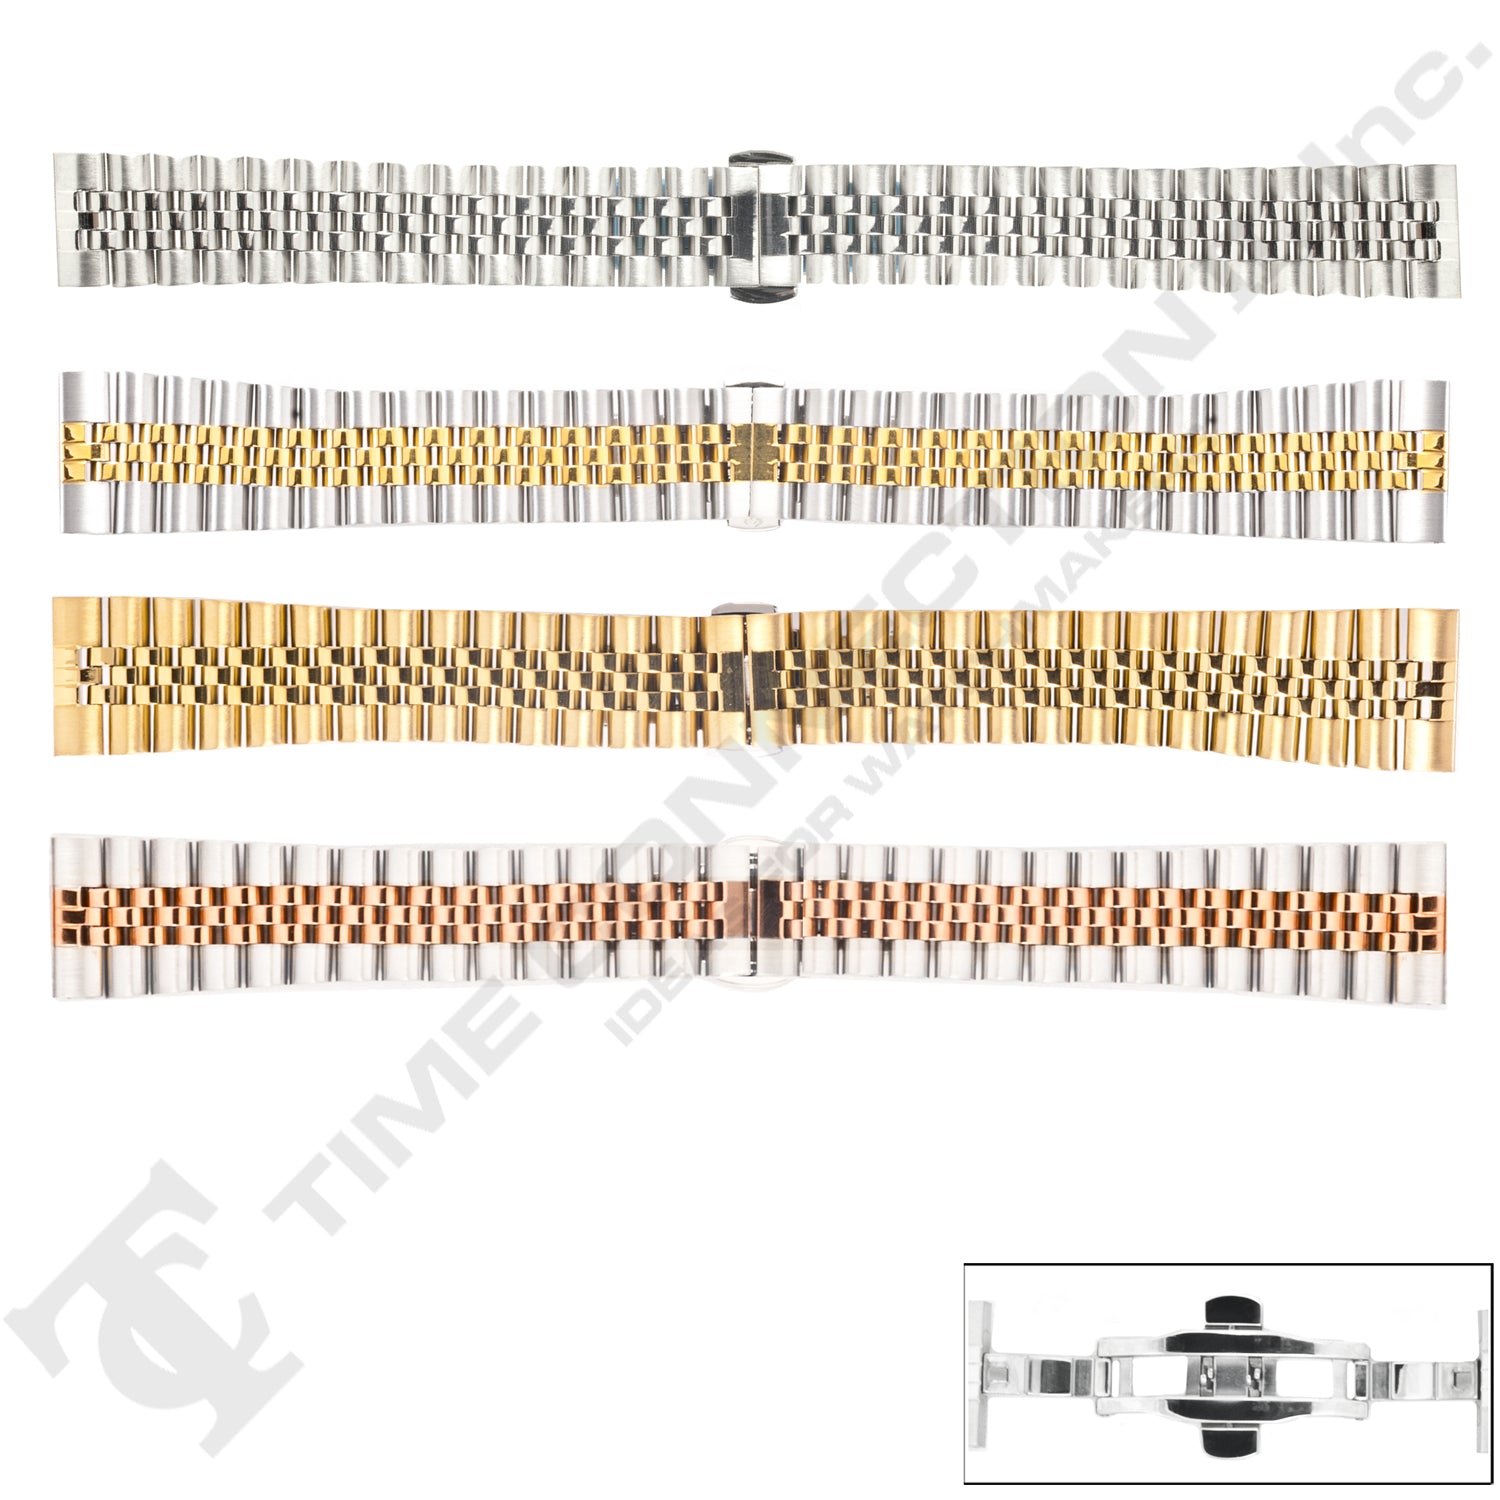 8004 Series Solid Stainless Steel Jubilee Style Metal Bands (Straight or Curved Ends)